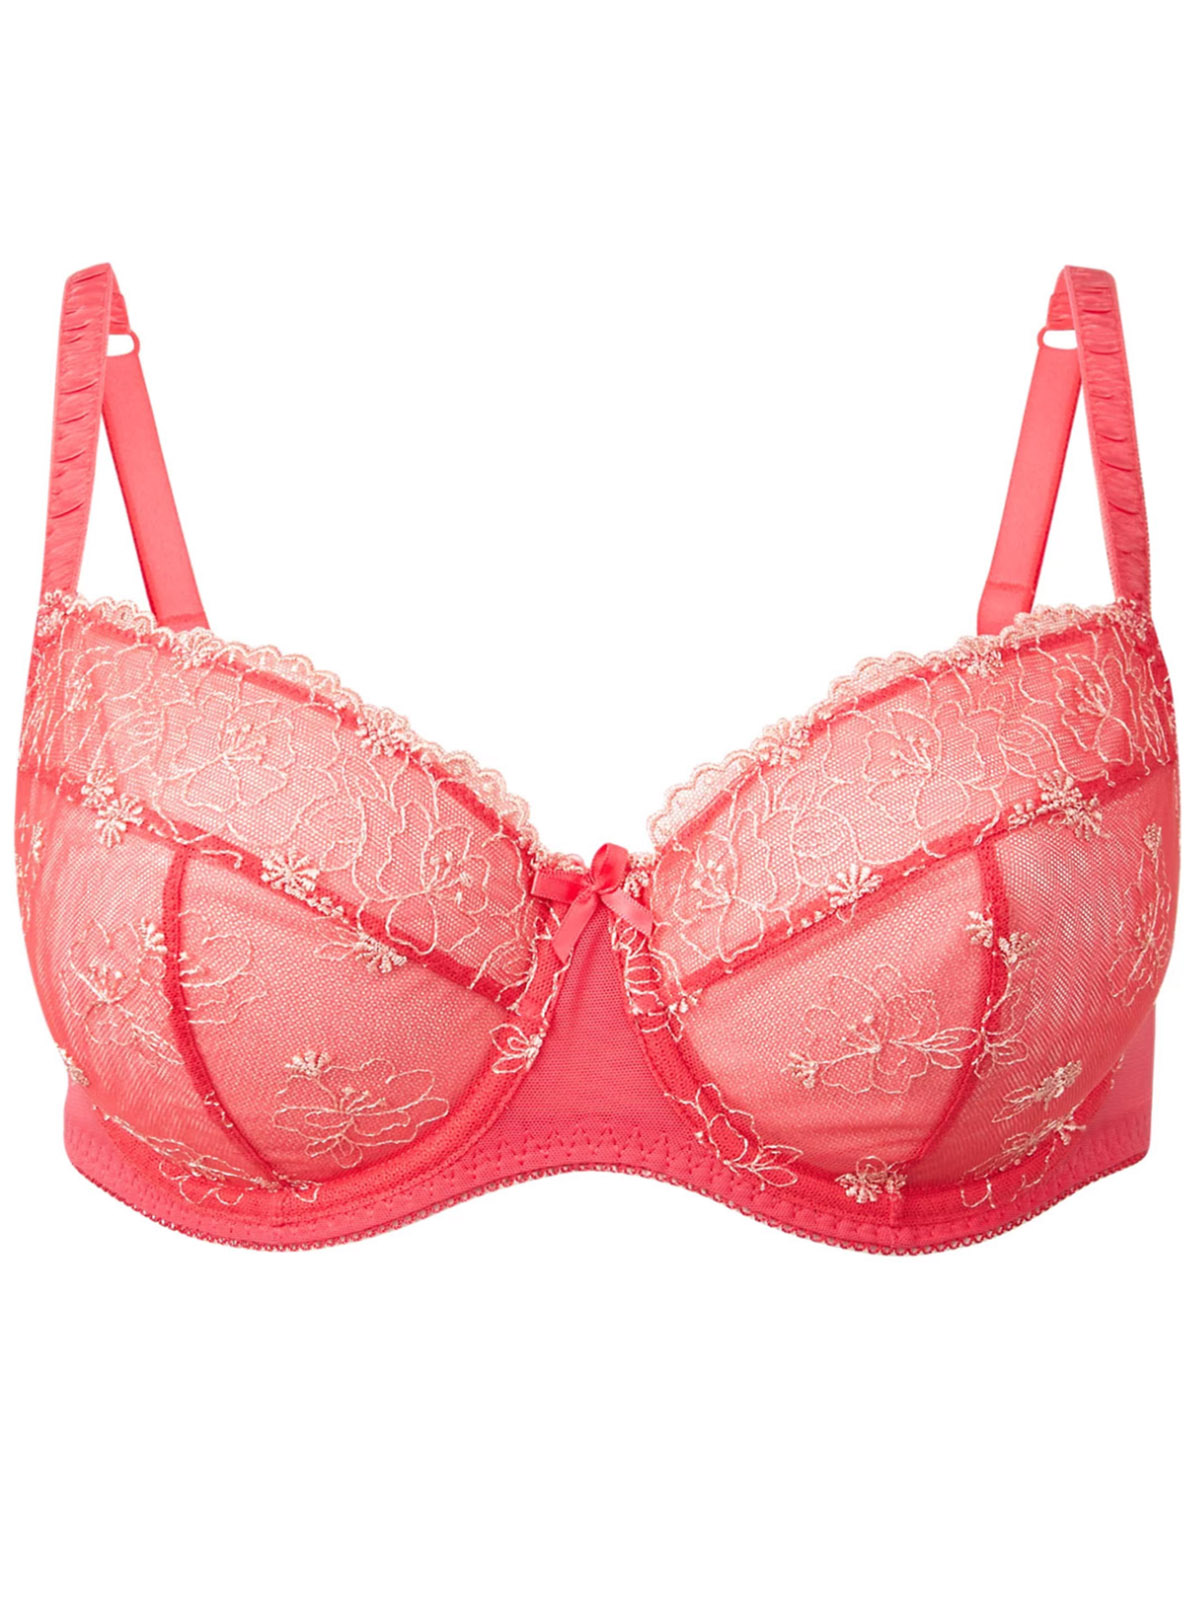  - - STRAWBERRY Embroidered Padded Plunge Bra - Size 32 to 40